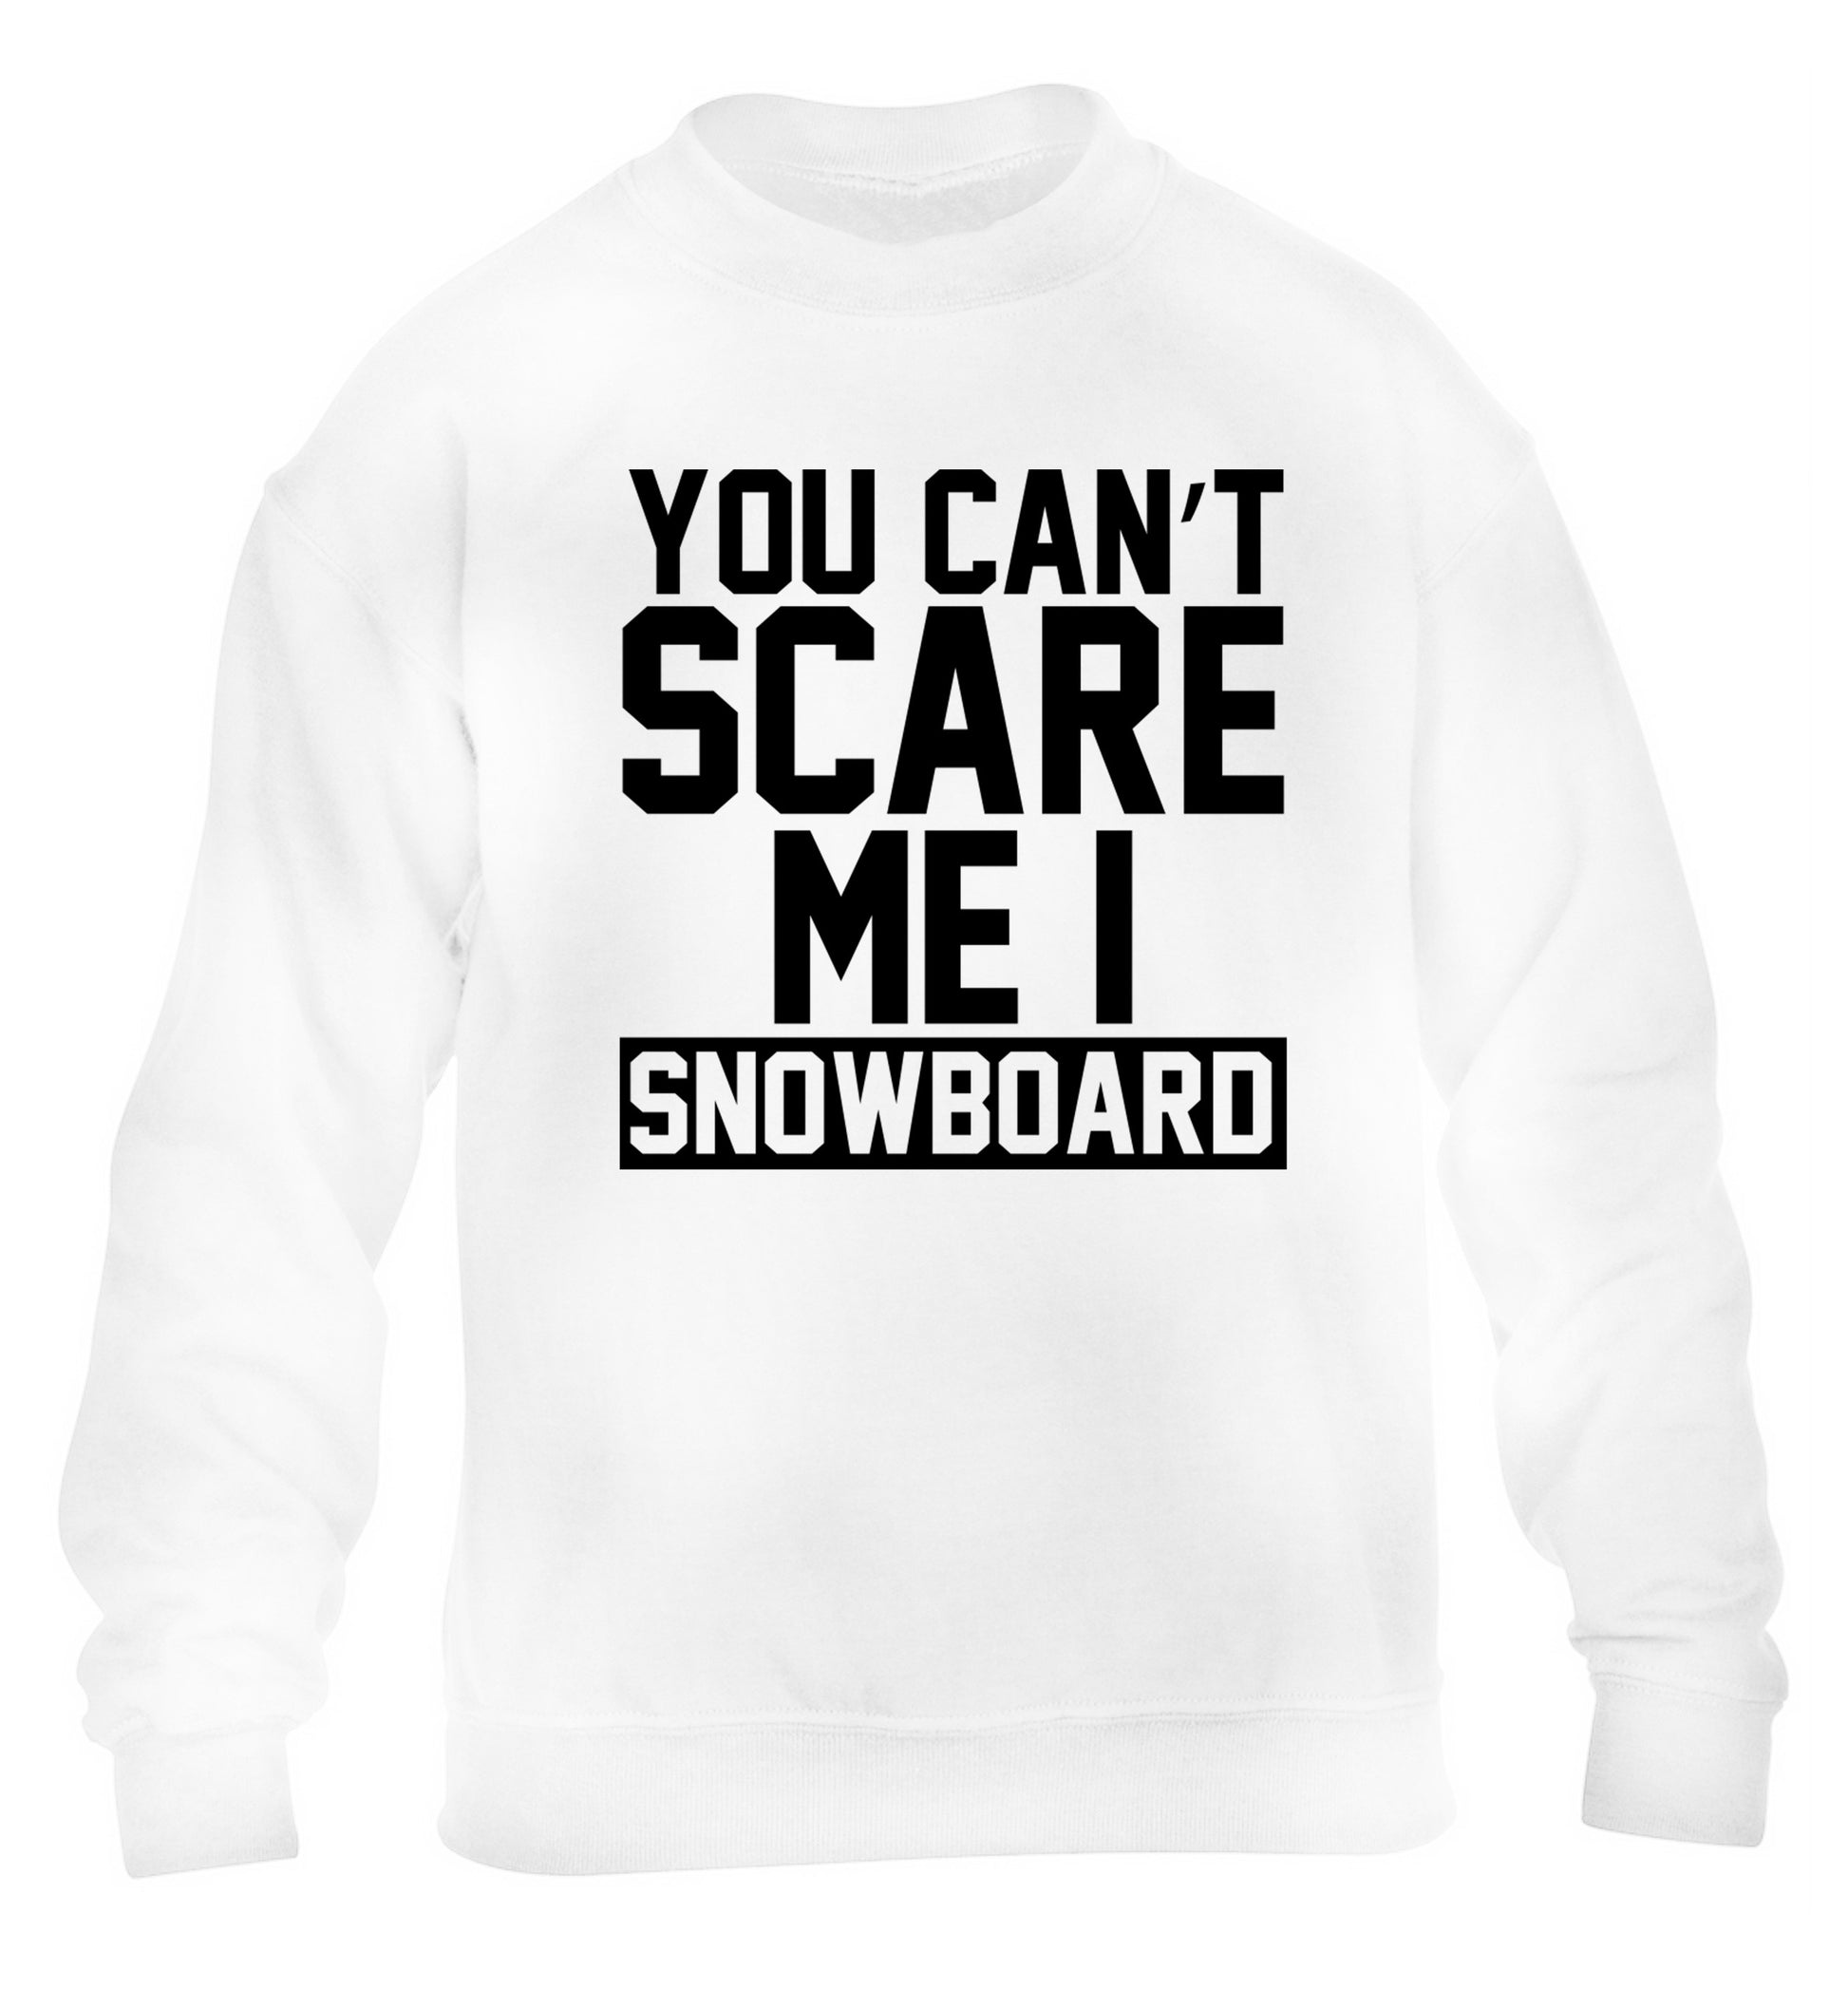 You can't scare me I snowboard children's white sweater 12-14 Years